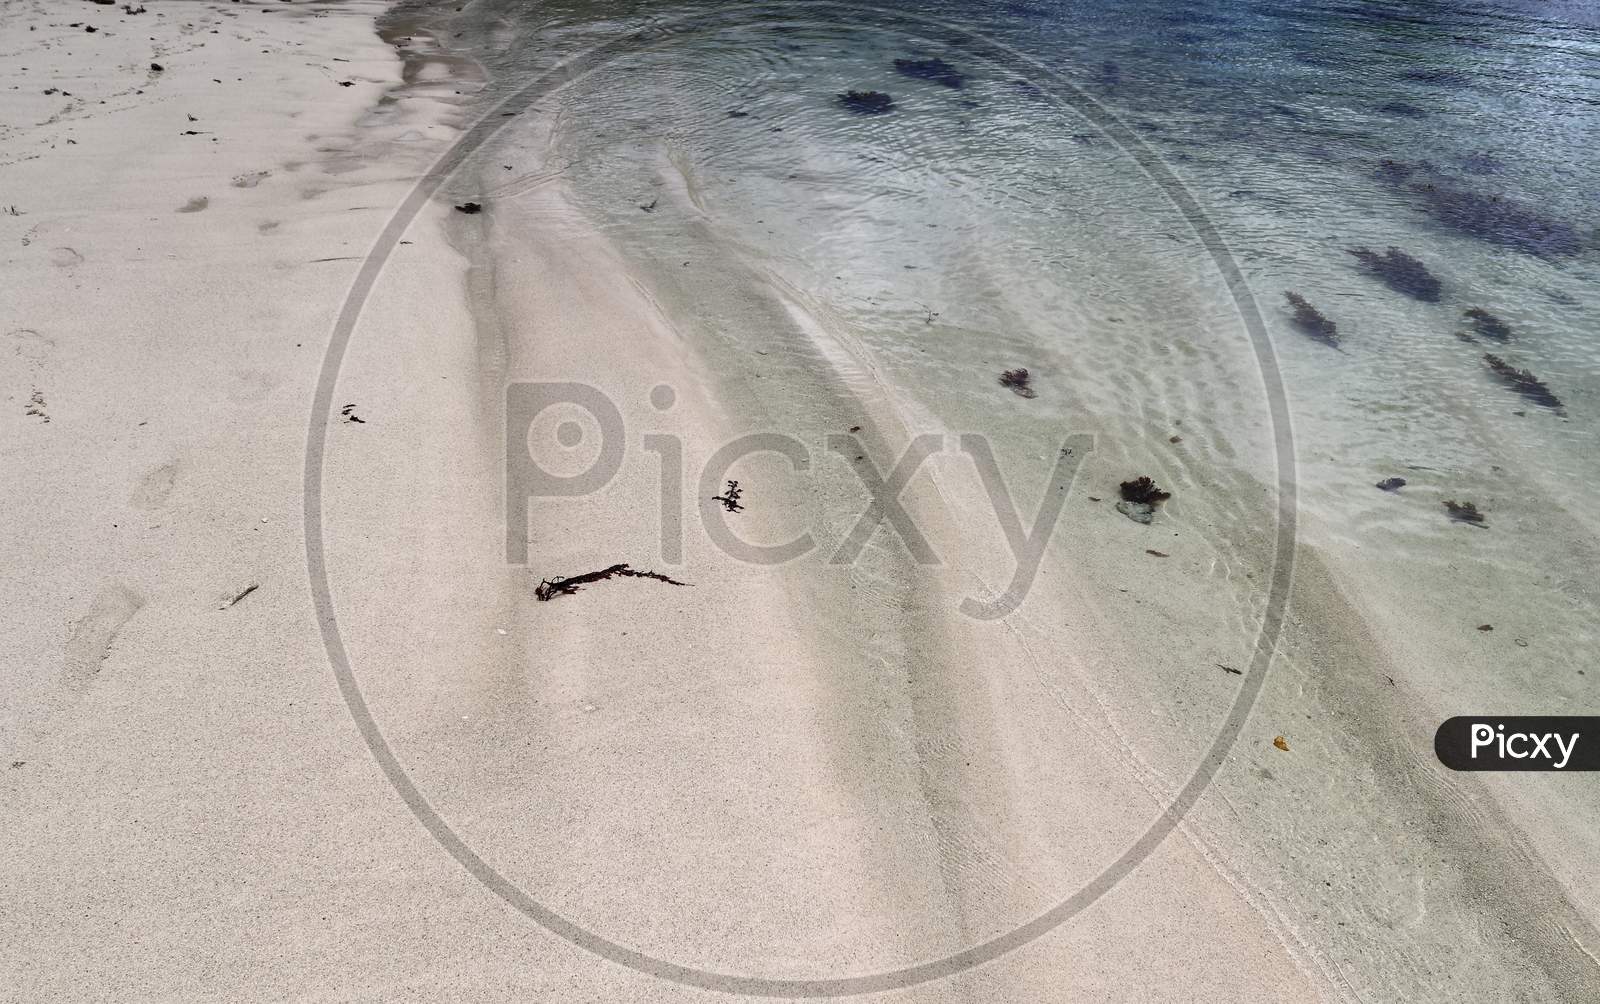 Beautiful shots of the white beaches on the Seychelles paradise island with footprints